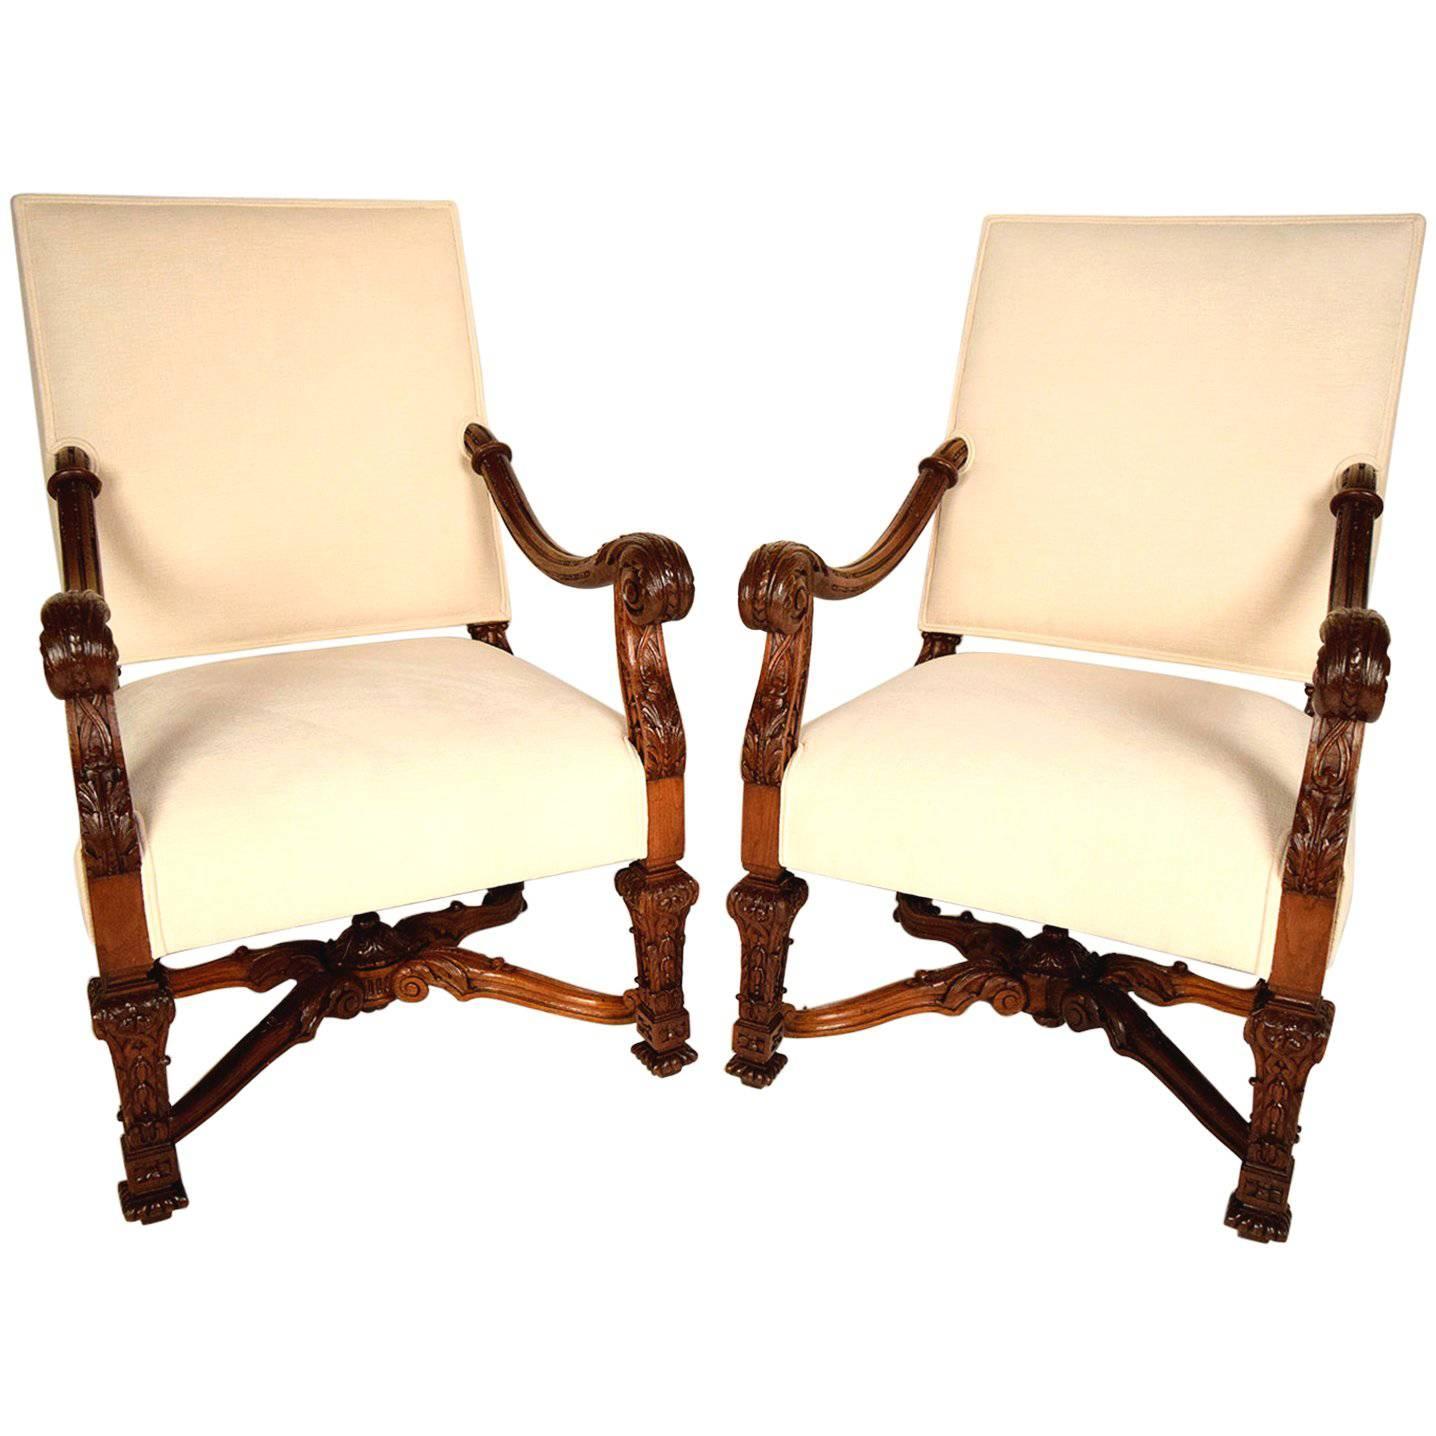 Pair of 19th Century French Carved Wood Chairs